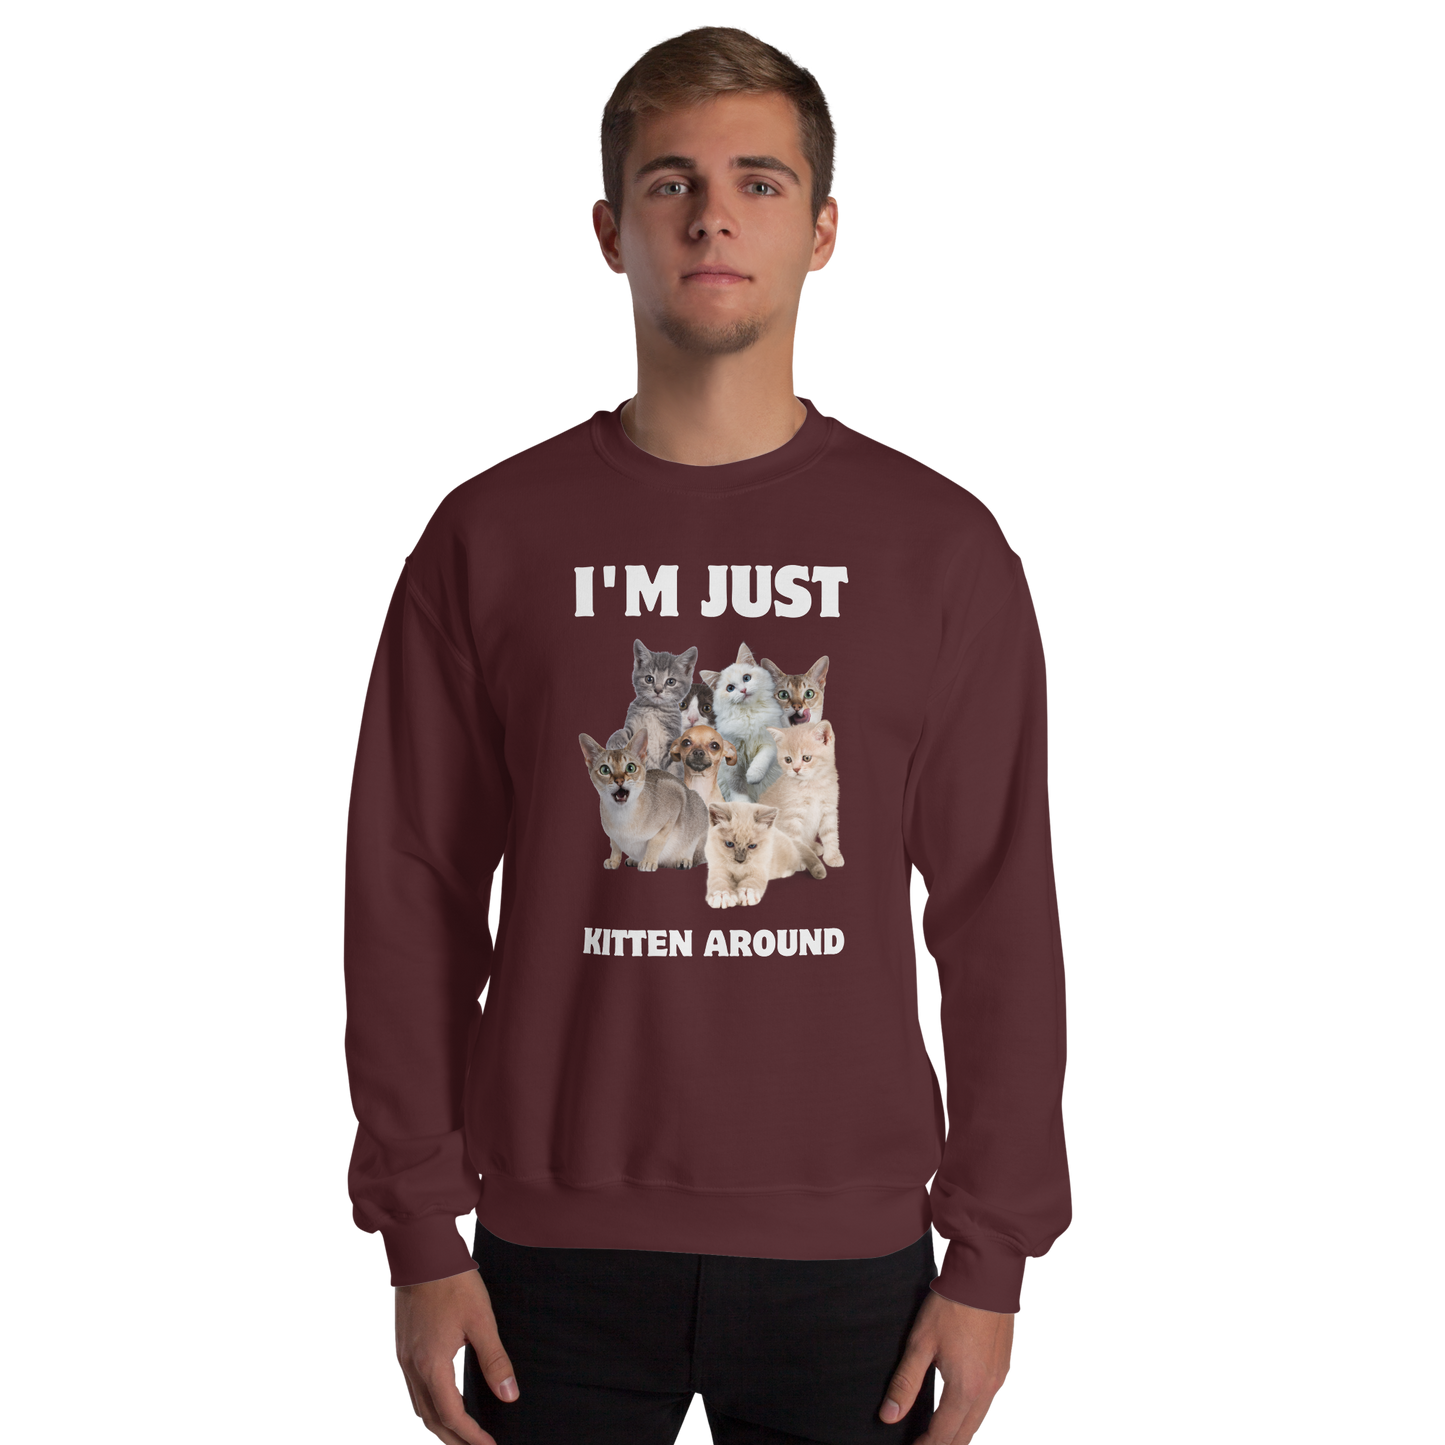 Man wearing a Maroon Cat Sweatshirt featuring an I'm Just Kitten Around graphic on the chest - Funny Graphic Cat Sweatshirts - Boozy Fox